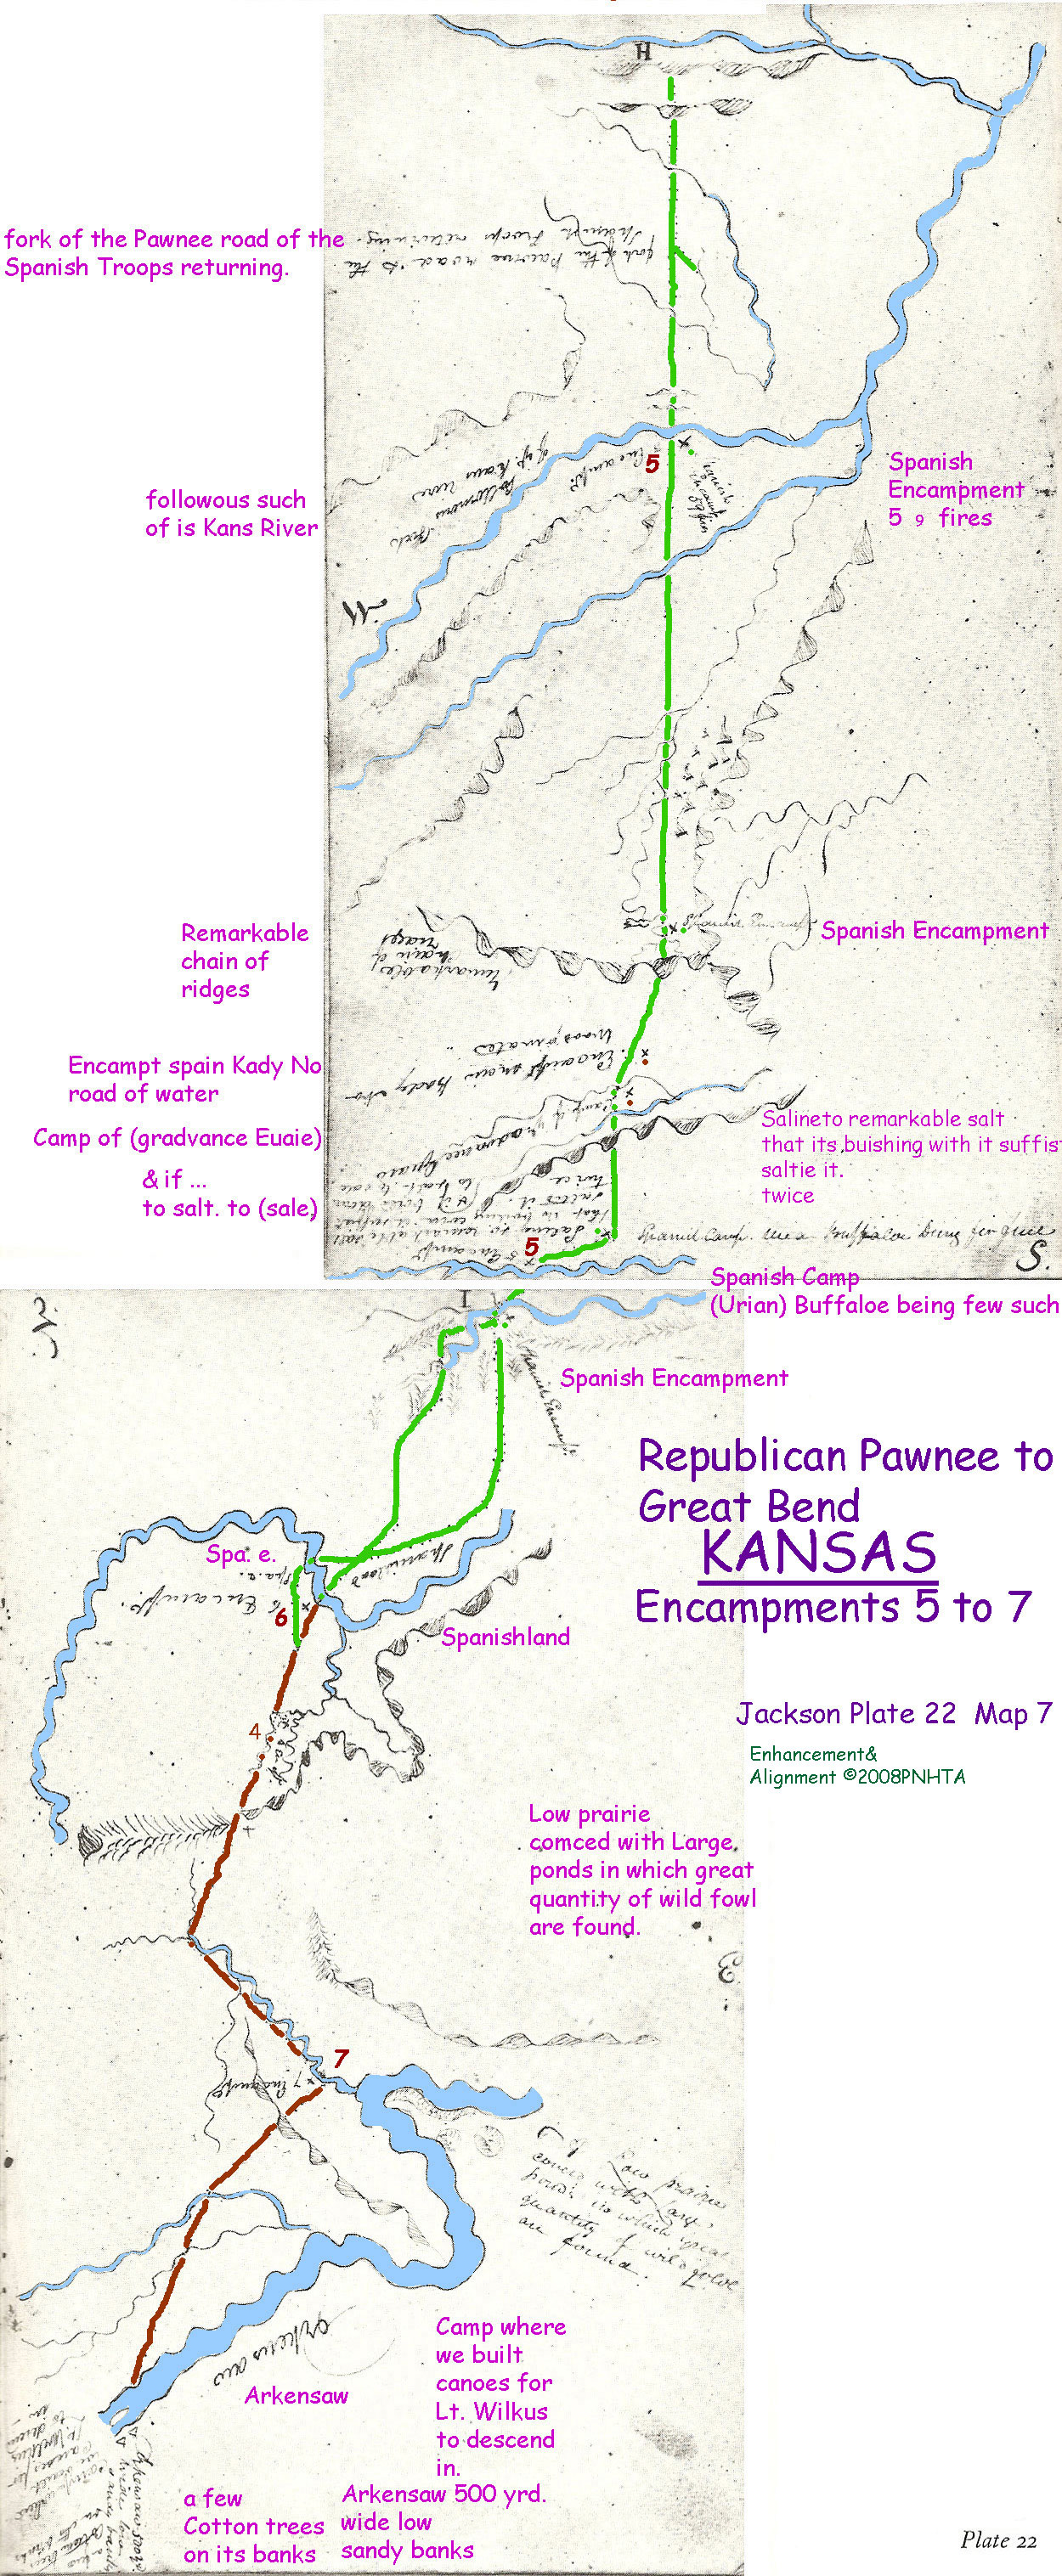 Map 7 (Field 22)- Pawnee Republic NE to Great Bend and the Arkansas River (Jackson Plate 22)